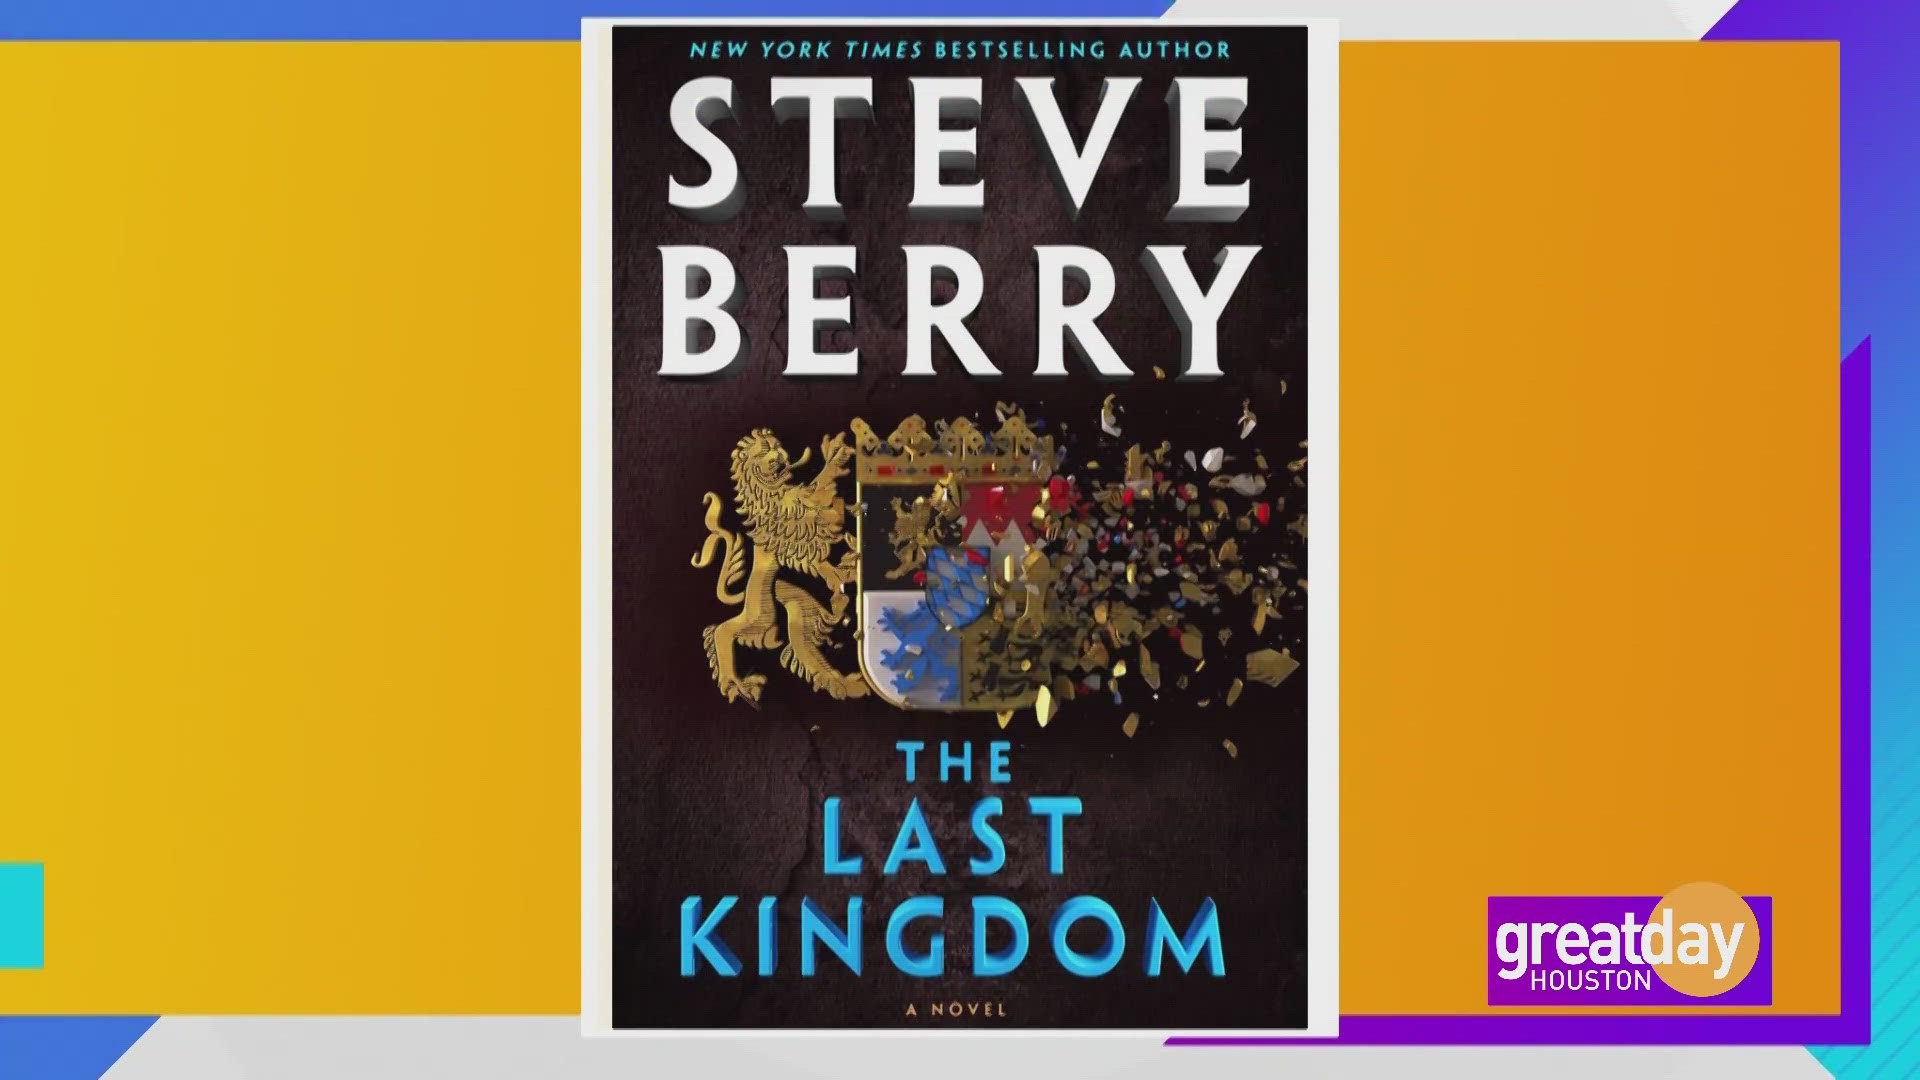 Steve Berry chronicles his journey from lawyer to international bestselling thriller author